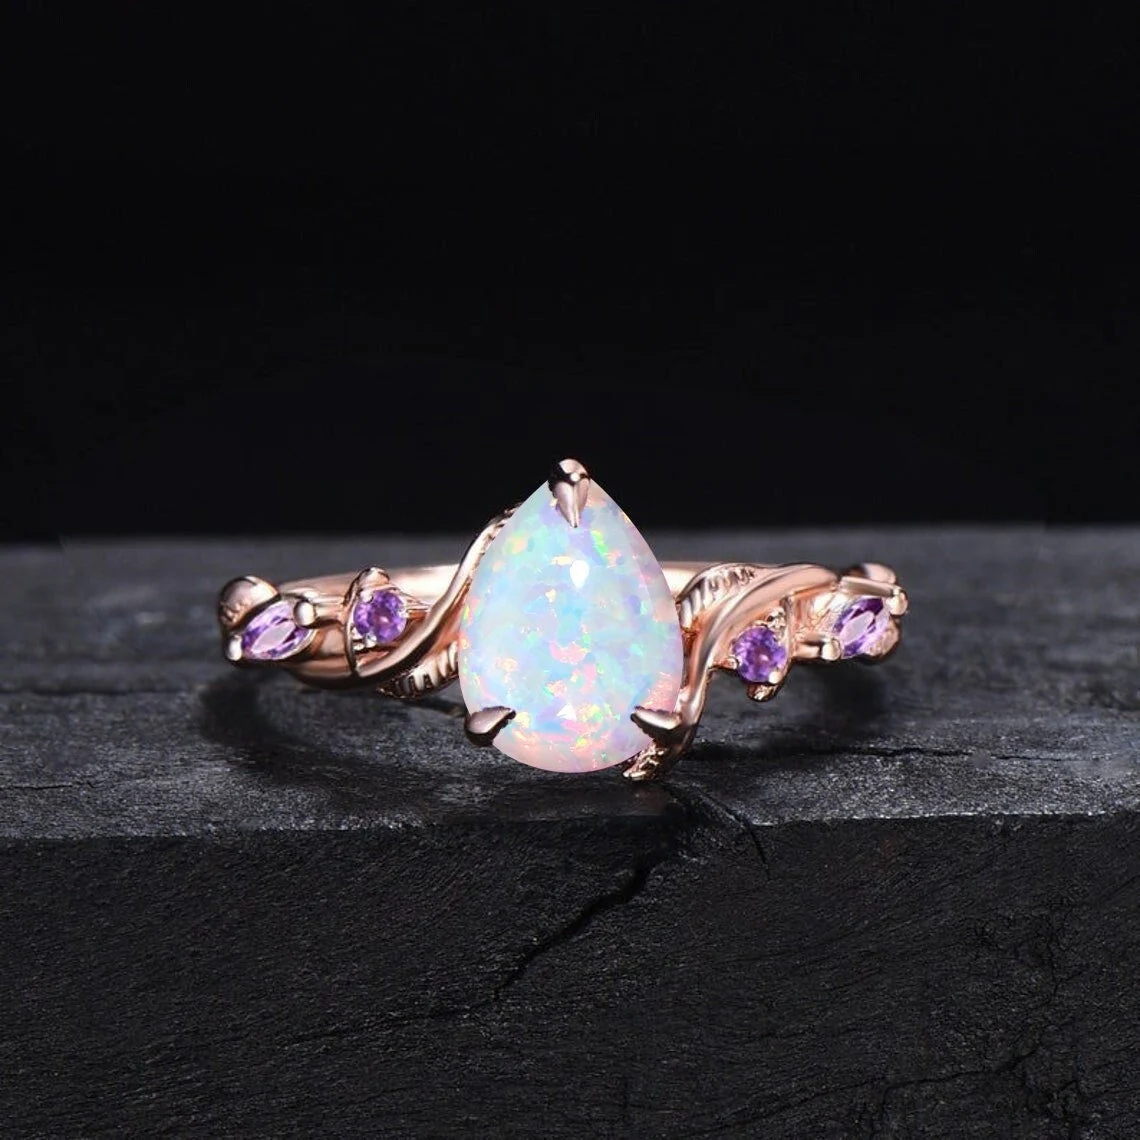 October Birthstone Engagement Ring Set 1.25ct Pear Shaped Nature Inspired Twist White Opal Bridal Set Marquise Natural Amethyst Wedding Ring